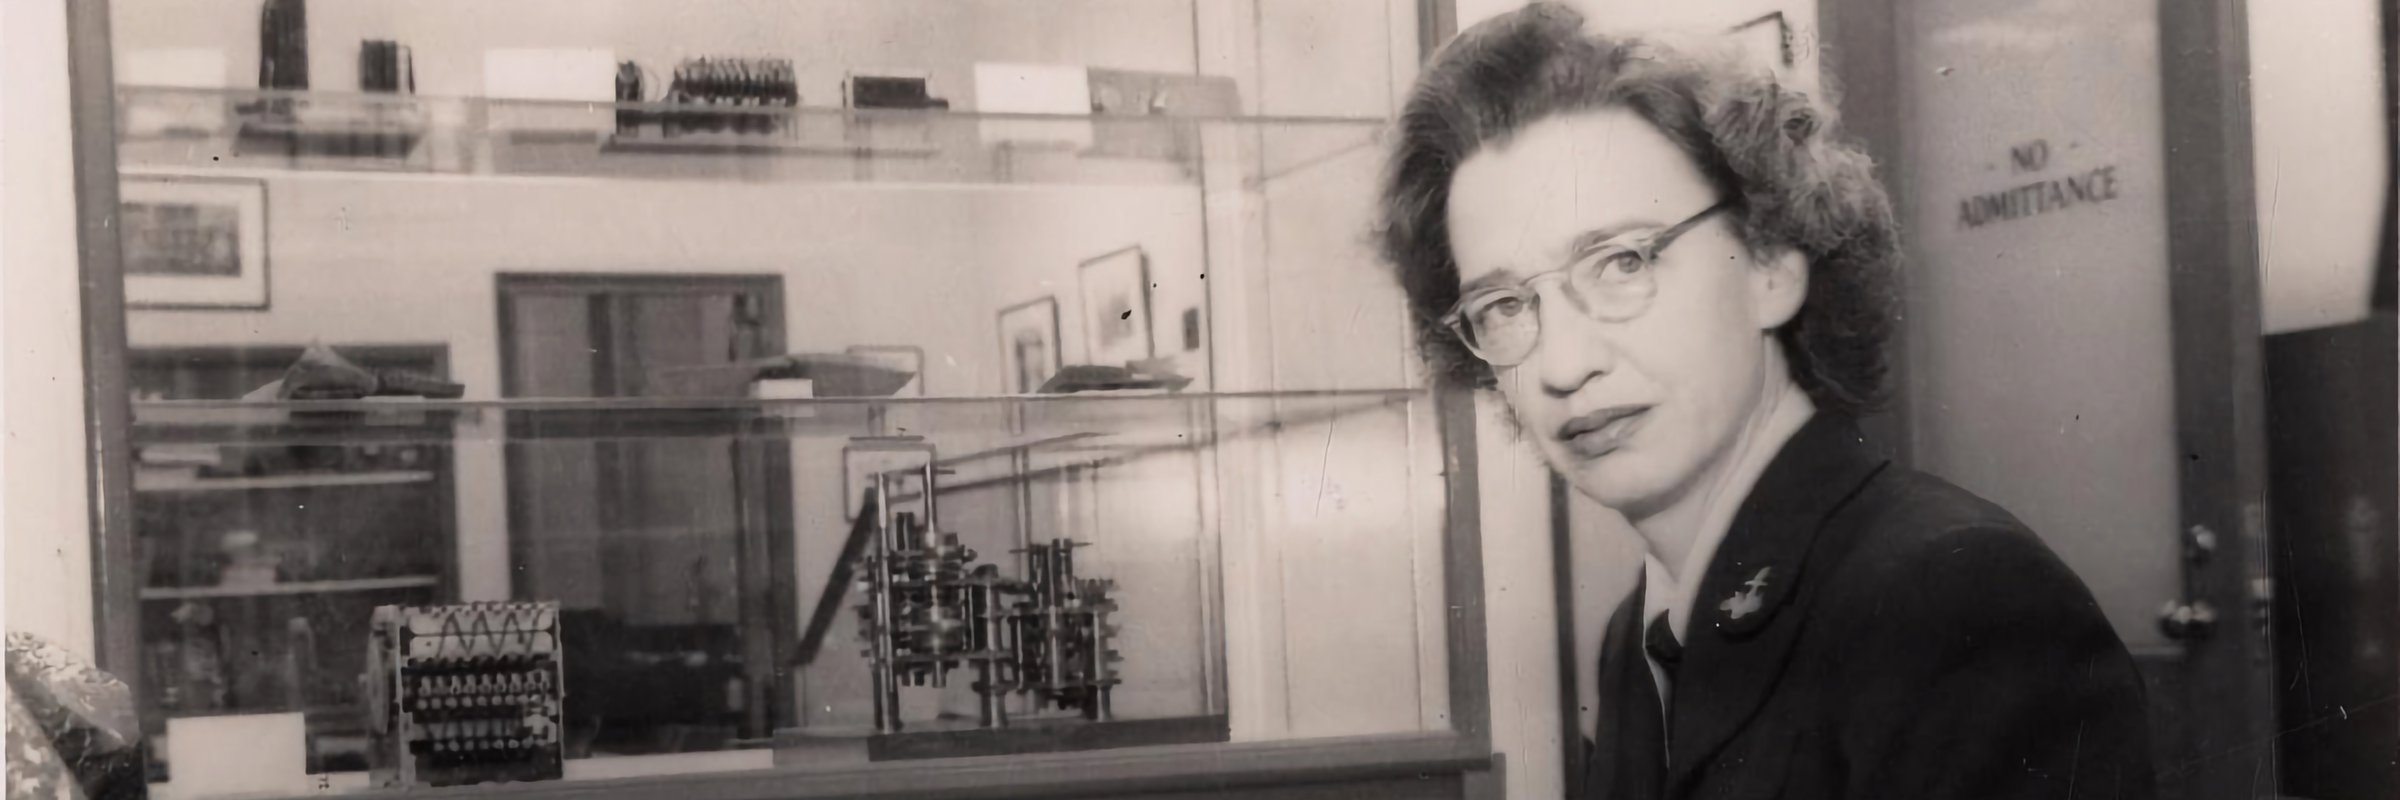 A photo of Lieutenant Grace Hopper looking at the camera from her desk, with mechanical instruments in the background.